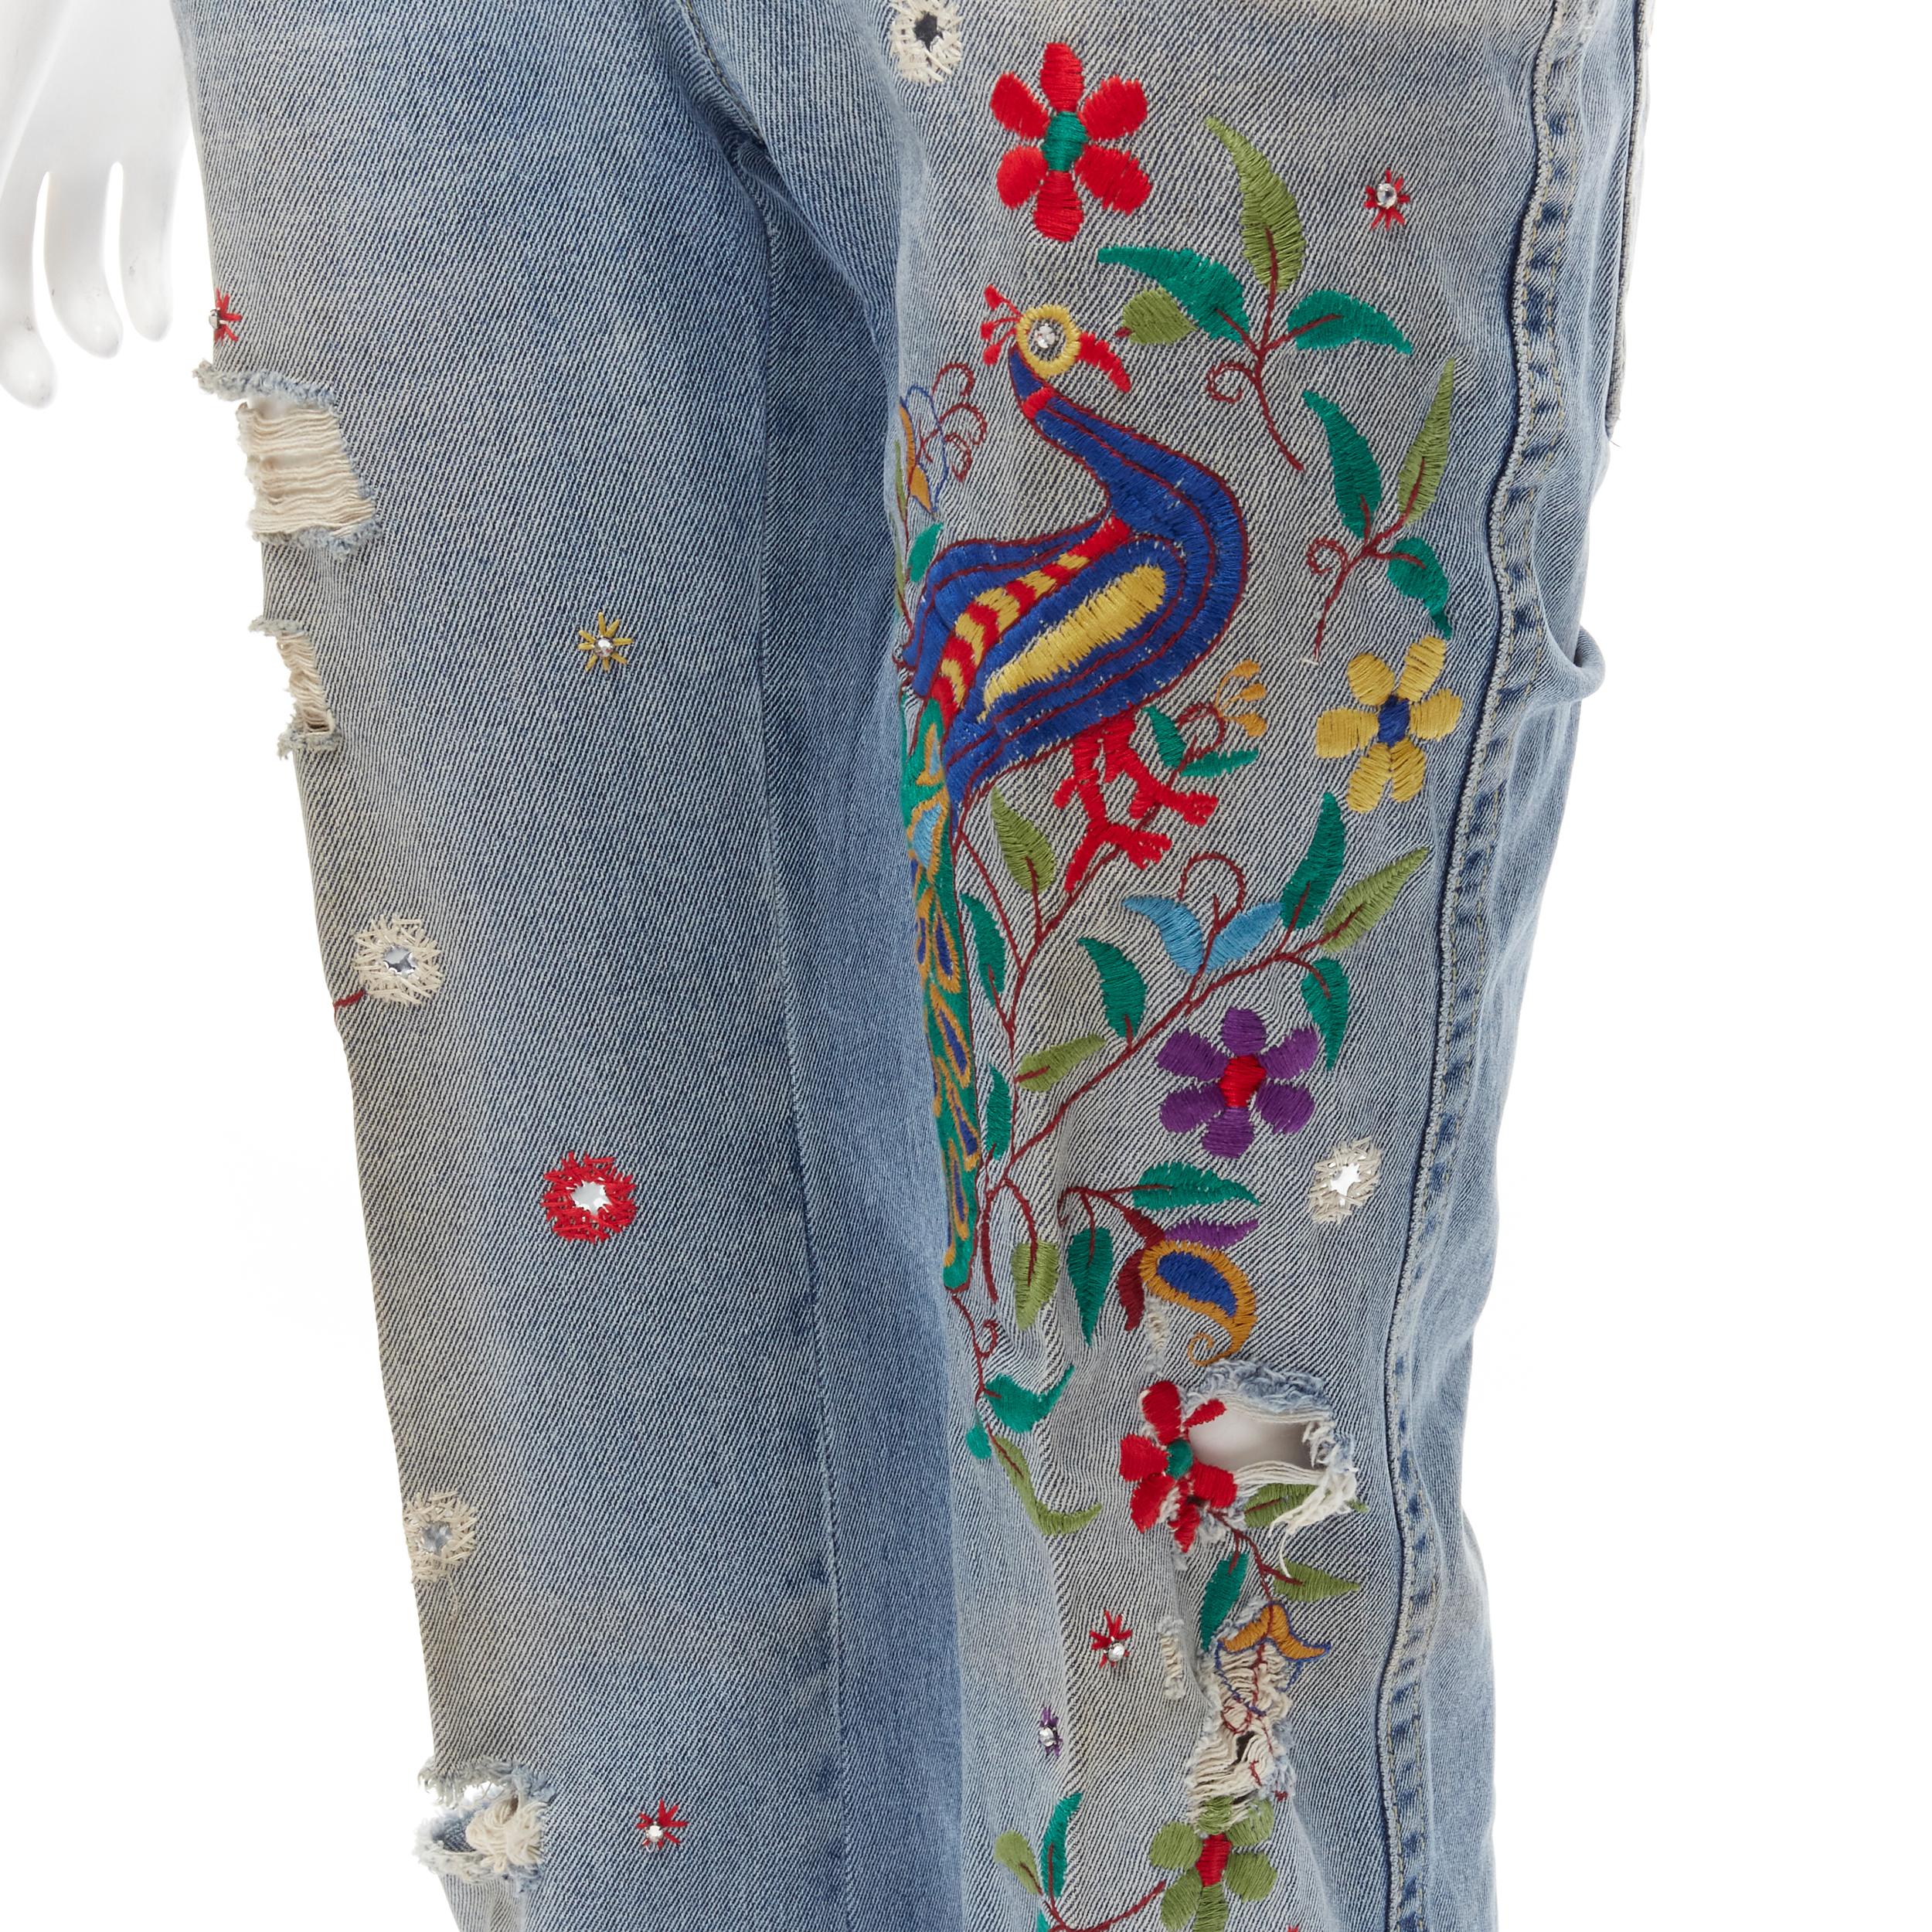 DSQUARED2 Y2K blue washed distressed denim peacock cropped jeans IT38 XS
Brand: Dsquared2
Material: Denim
Color: Blue
Closure: Zip Fly
Extra Detail: Low wide Y2k jeans. Distressed mud washed denim. 4-pocket design. Embroidery design with crystal